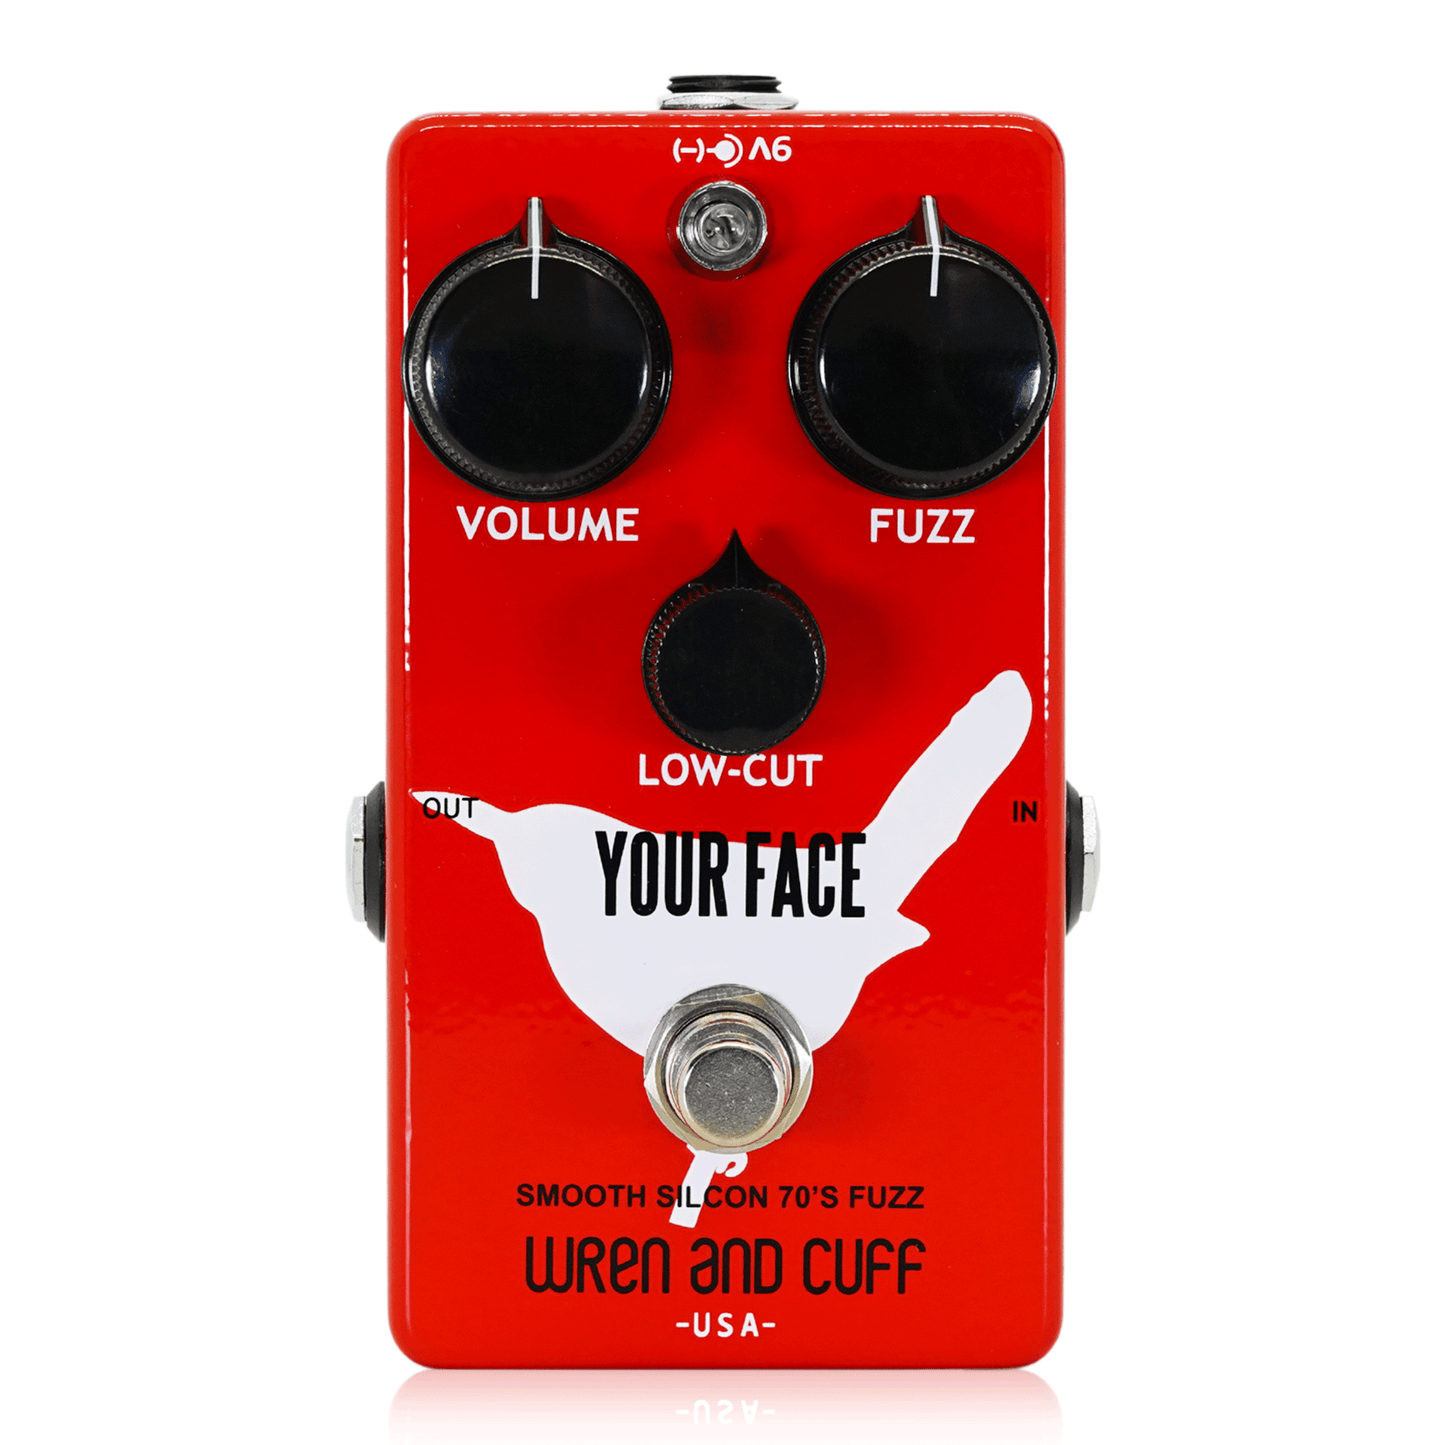 Wren and Cuff/Your Face Smooth Silicon 70's Fuzz – LEP INTERNATIONAL